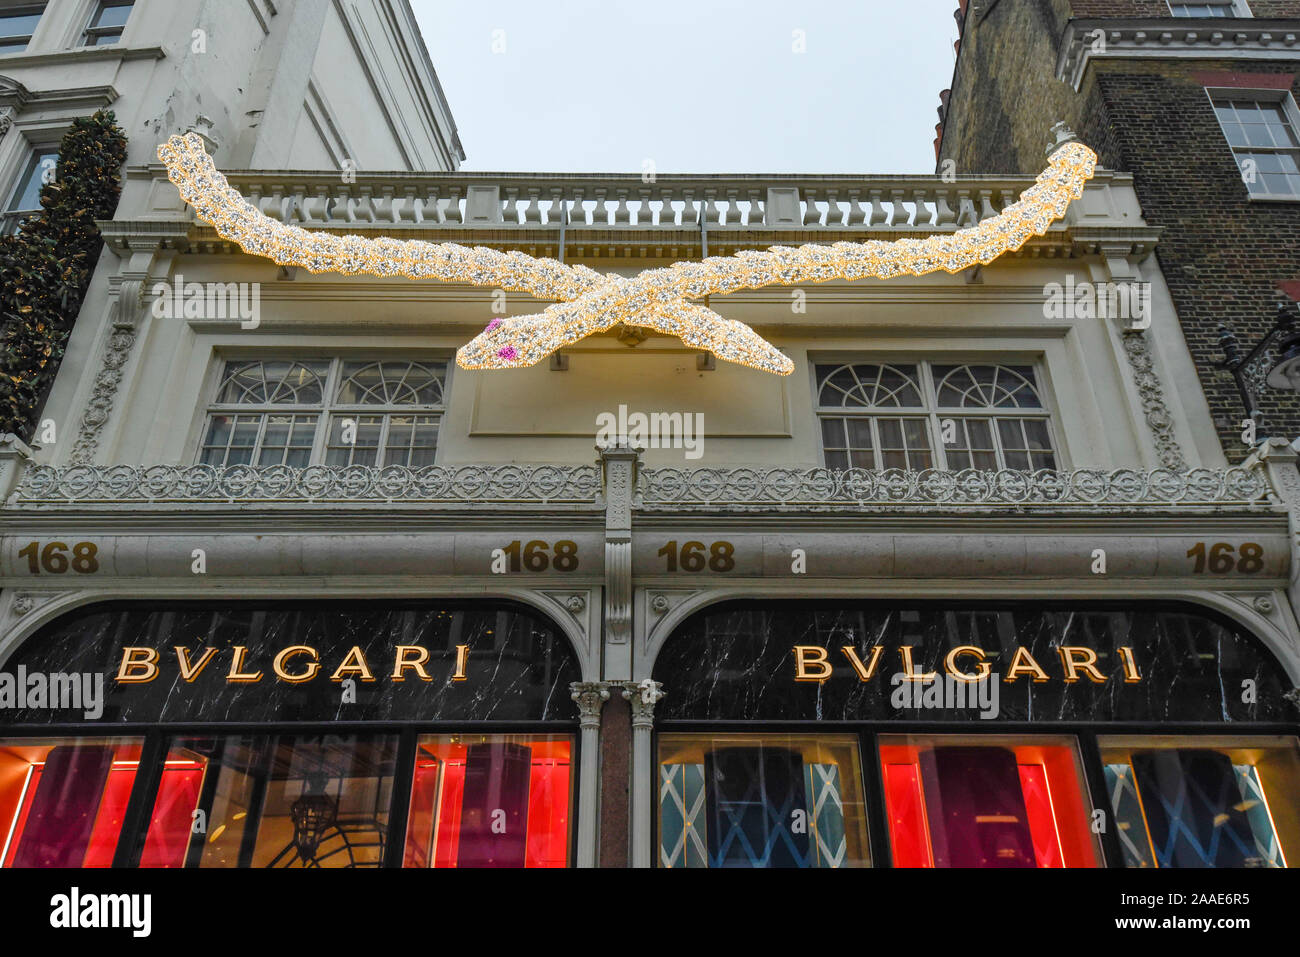 London, UK.  21 November 2019.  Christmas decorations on the exterior of the Bulgari store in Mayfair.  Retailers continue to battle against losing custom to online sales, but high-end, luxury stores offer a shopping experience to wealthy buyers visiting from overseas. Bulgari owner LVMH, the company owned by the family of Europe's wealthiest man Bernard Arnault, is currently bidding to buy Tiffany & Co. for US$16bn.   Credit: Stephen Chung / Alamy Live News Stock Photo